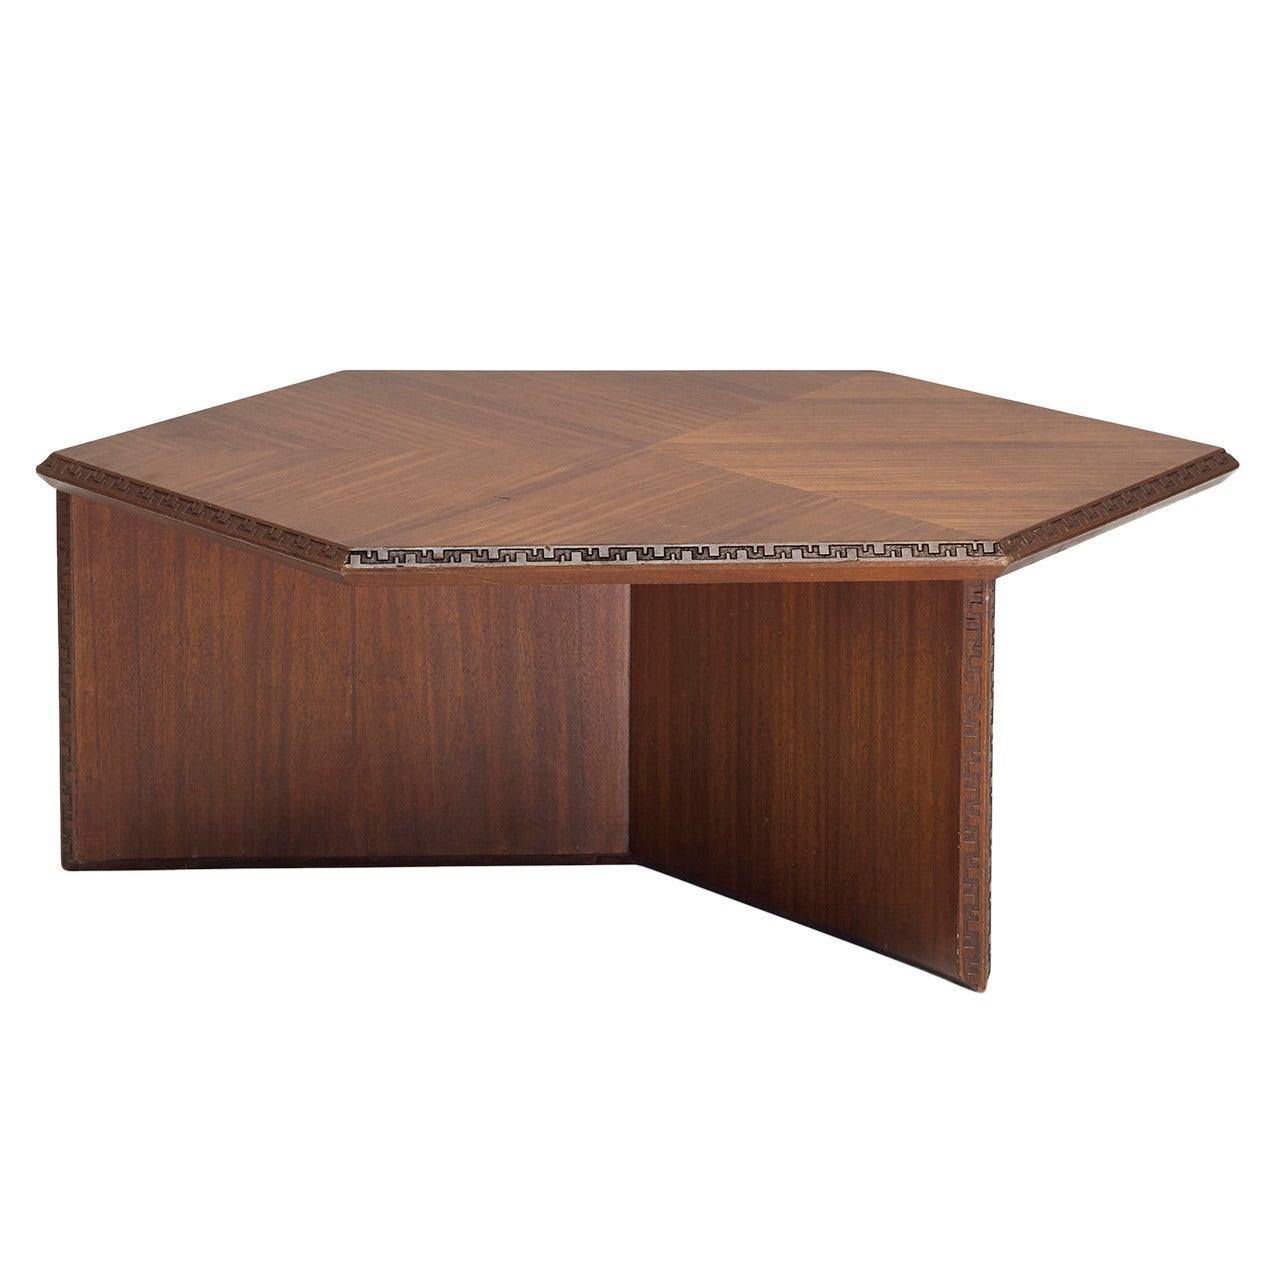 Coffee Table, Model 453-C by Frank Lloyd Wright for Heritage Henredon